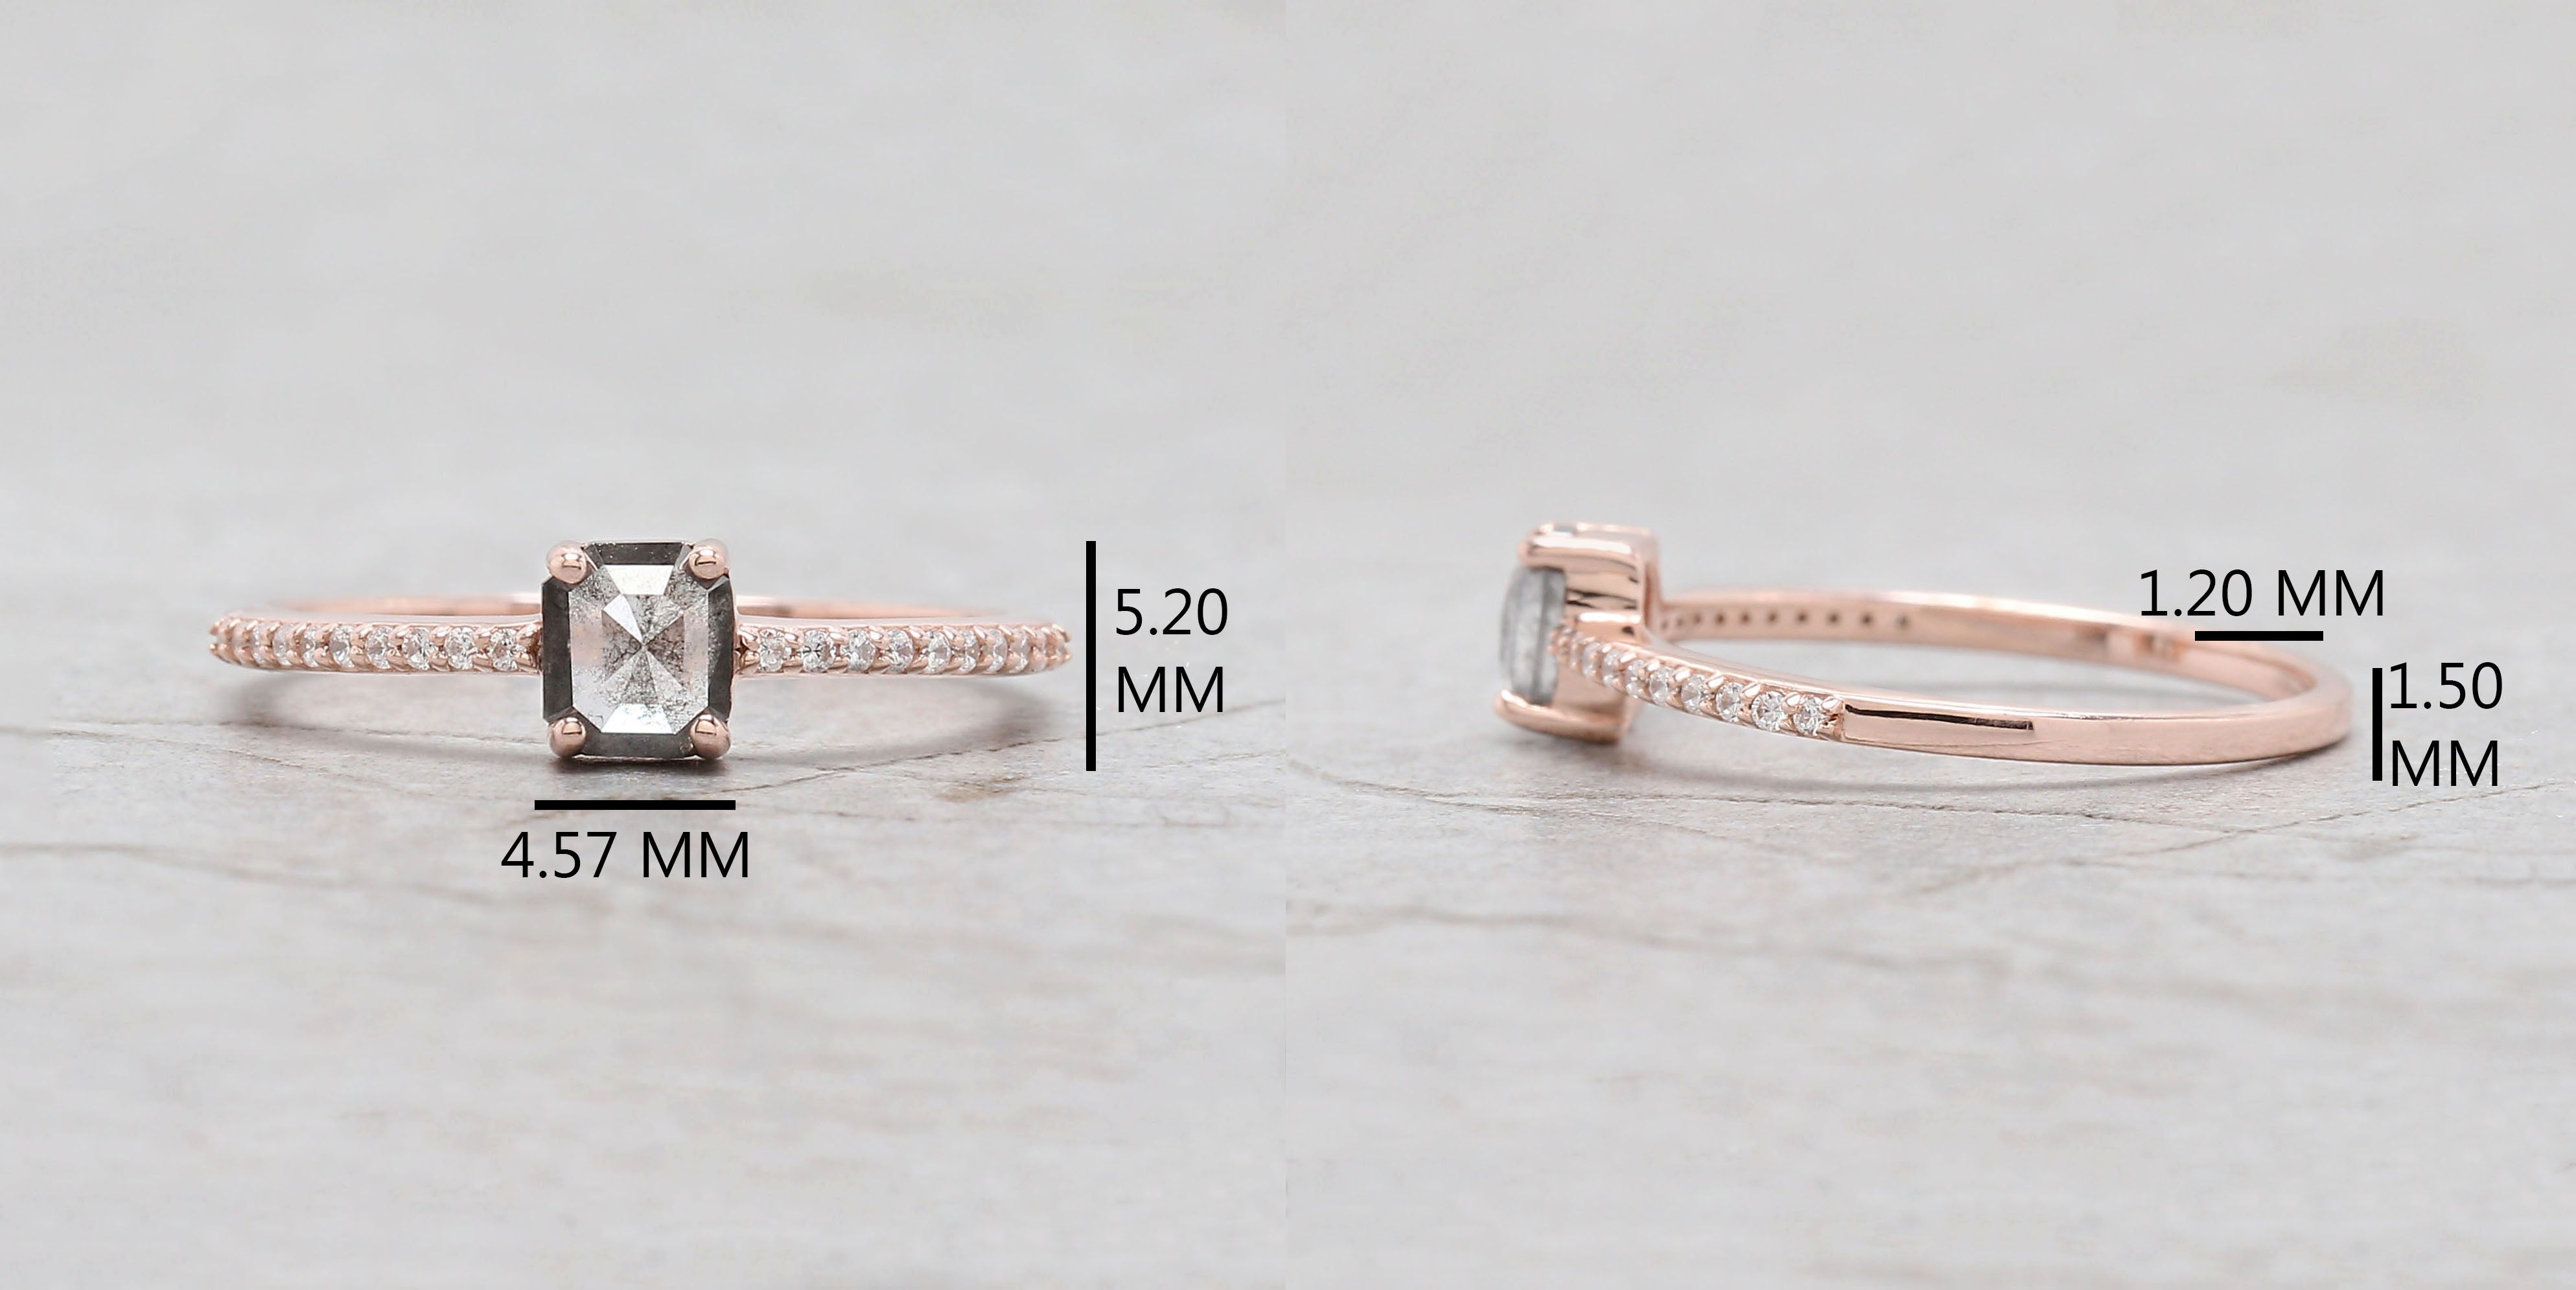 Emerald Cut Salt And Pepper Diamond Ring 0.50 Ct 5.10 MM Emerald Diamond Ring 14K Solid Rose Gold Silver Engagement Ring Gift For Her QL6484